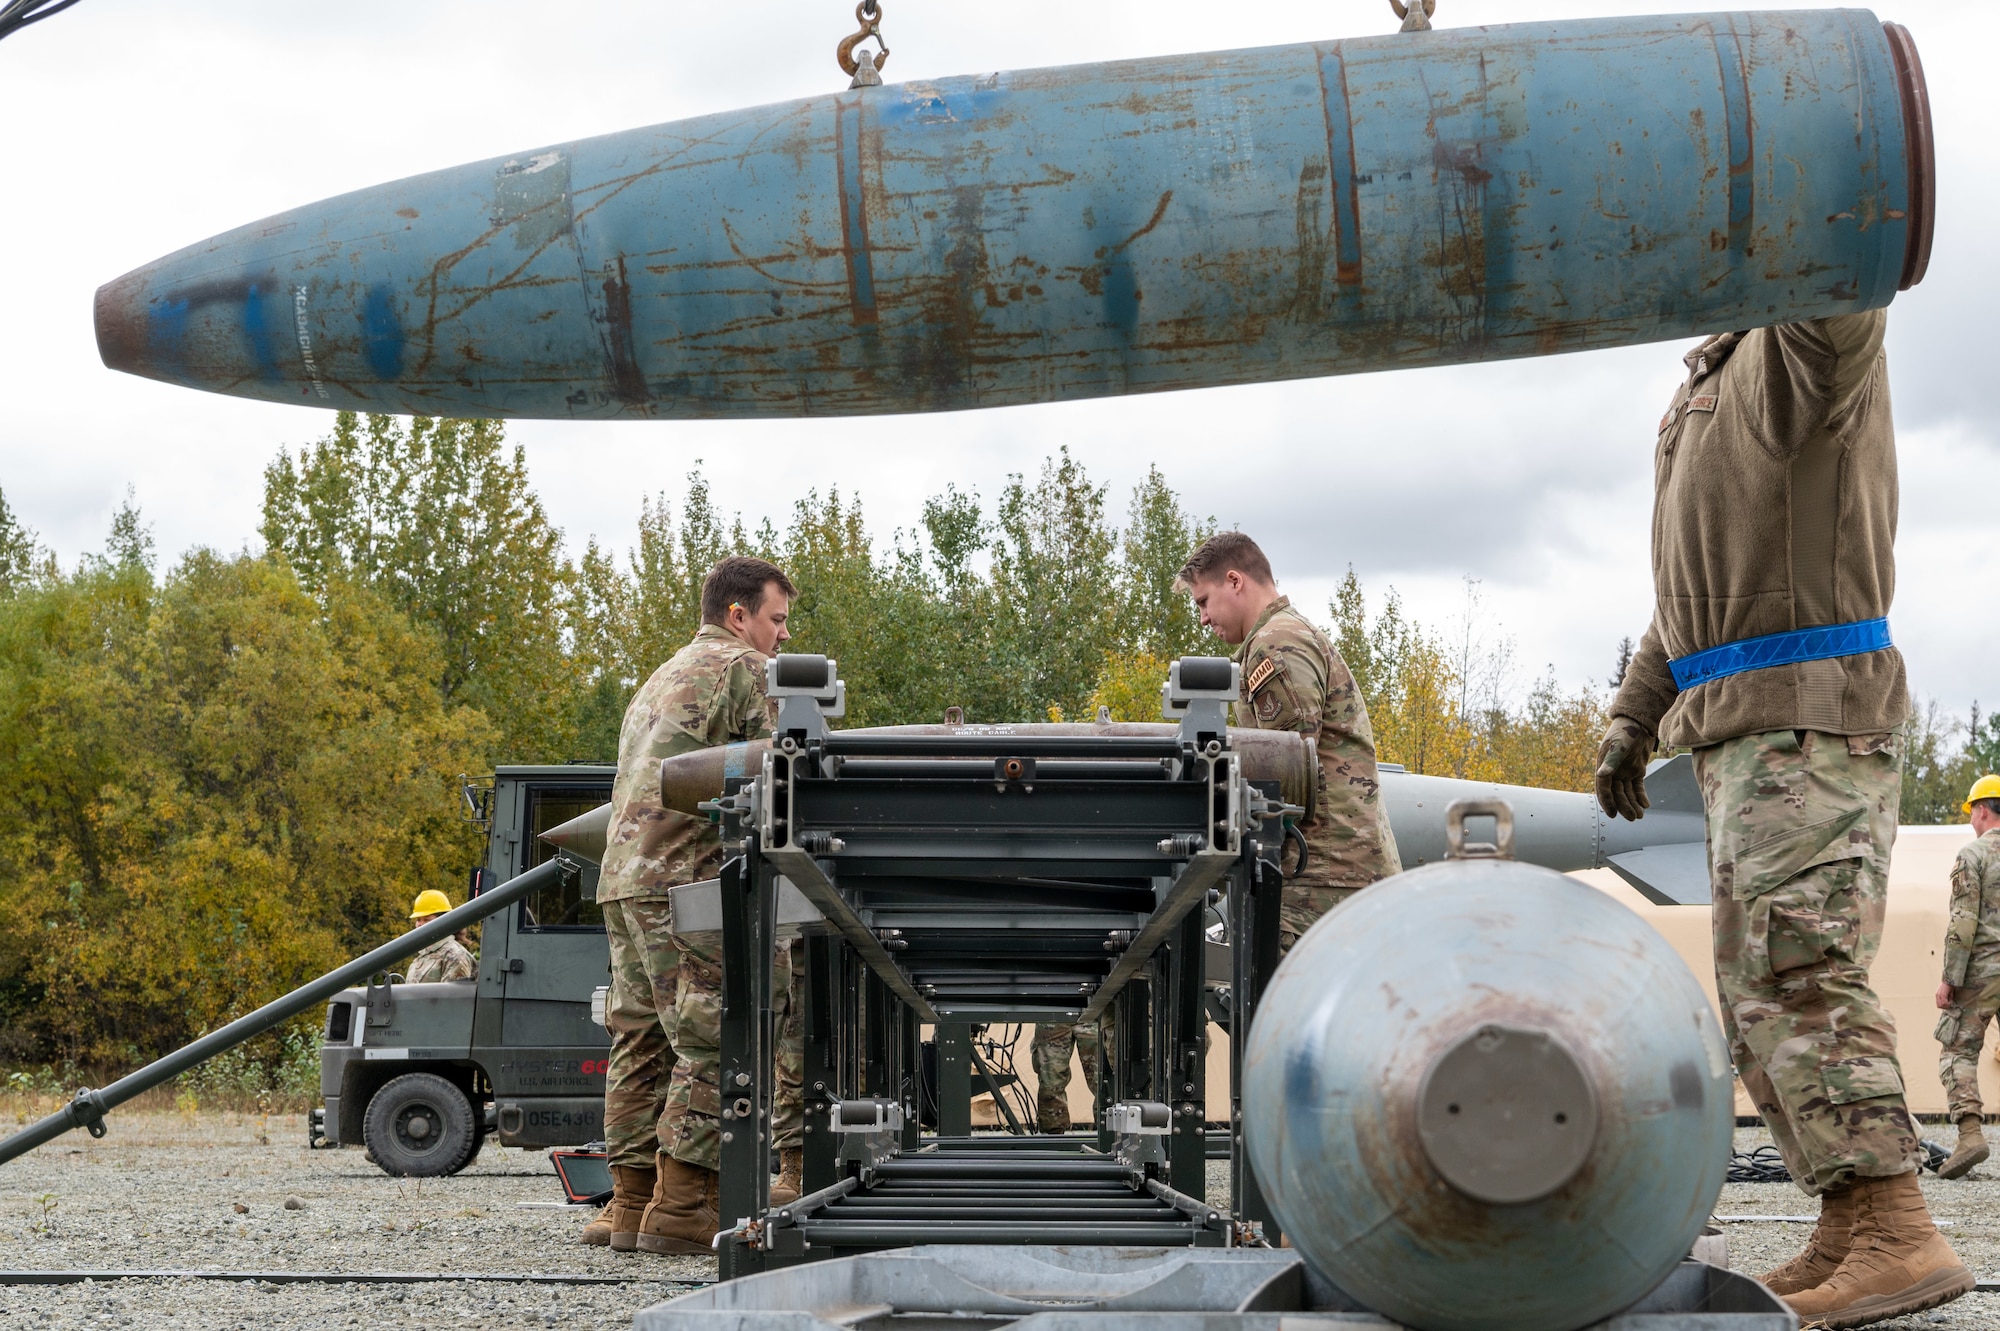 U.S. Air Force Senior Airman Justin Sikes (left) and Senior Airman Willis Collier (middle), Airmen assigned to the 3rd Munitions Squadron, work on dummy ordnance while Tech. Sgt. Kyle Gordon loads dummy ordnance onto the line during the second annual Nimble Flurry exercise at Joint Base Elmendorf-Richardson, Alaska, Sept 18, 2023.